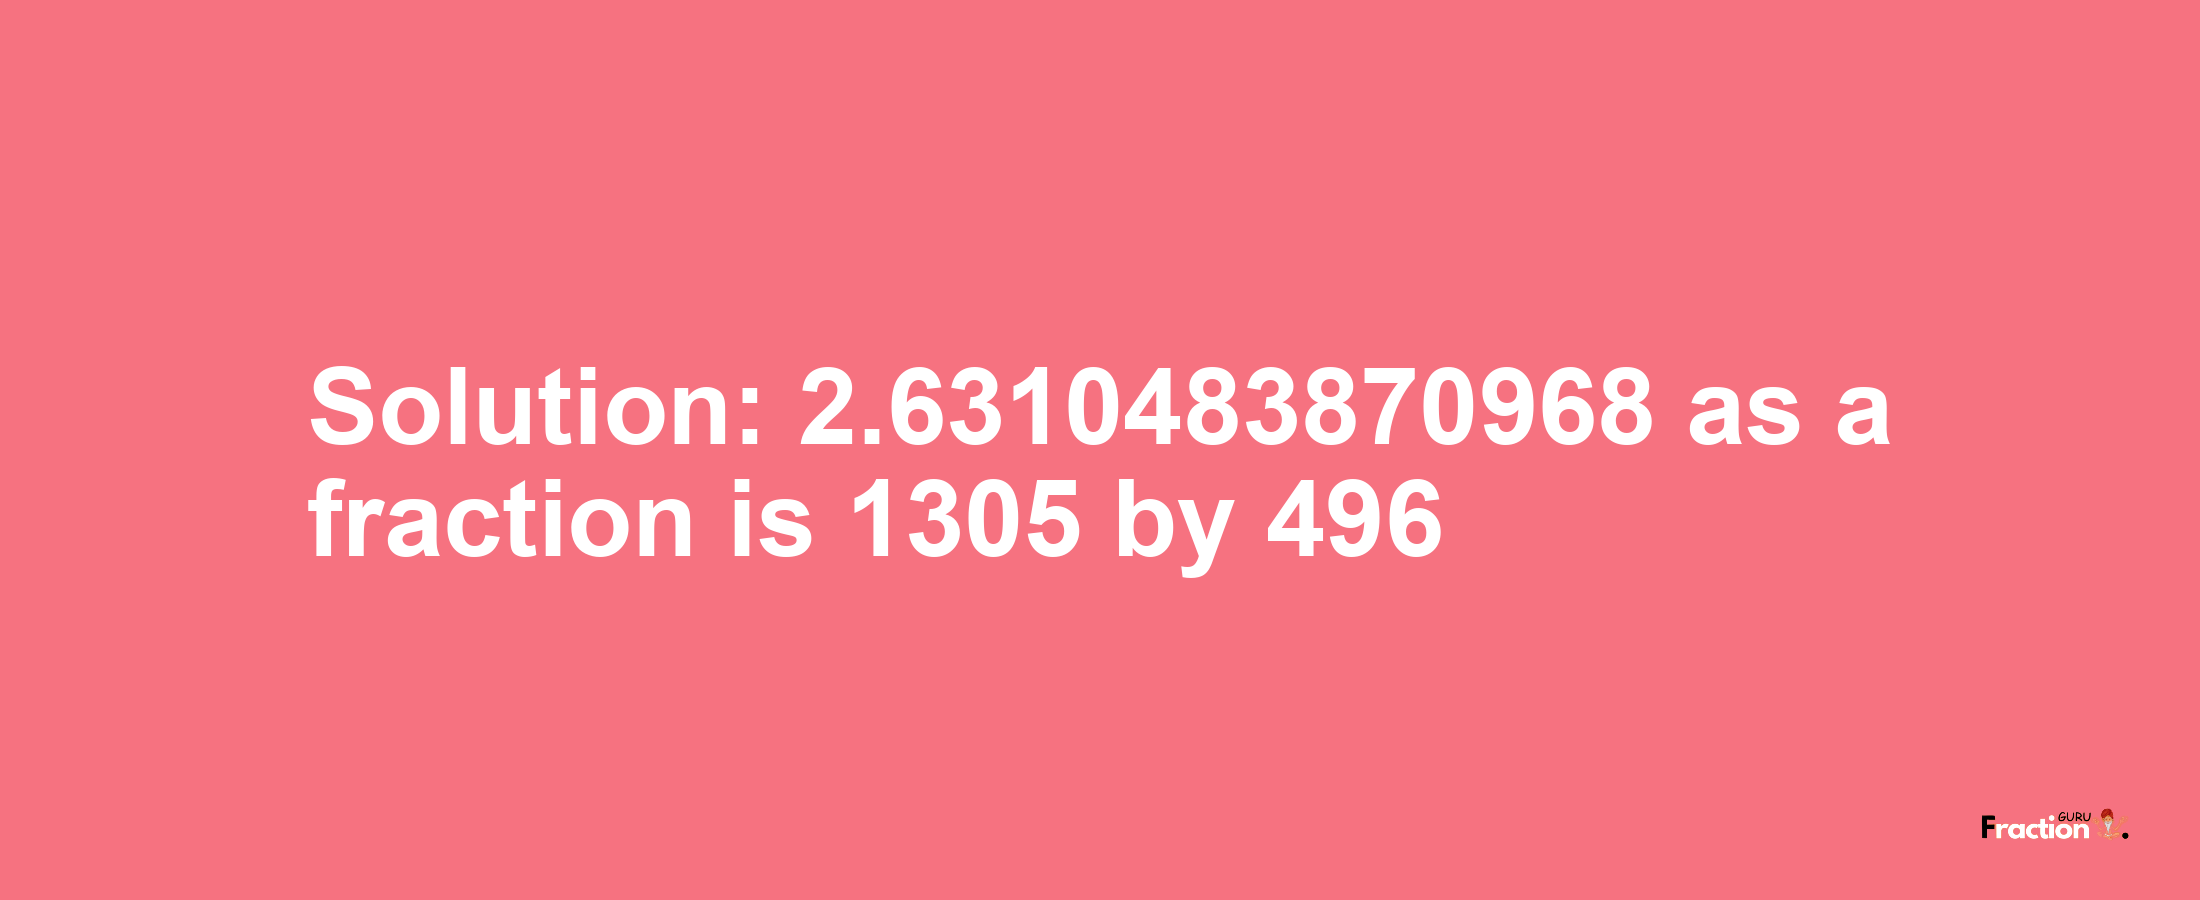 Solution:2.6310483870968 as a fraction is 1305/496